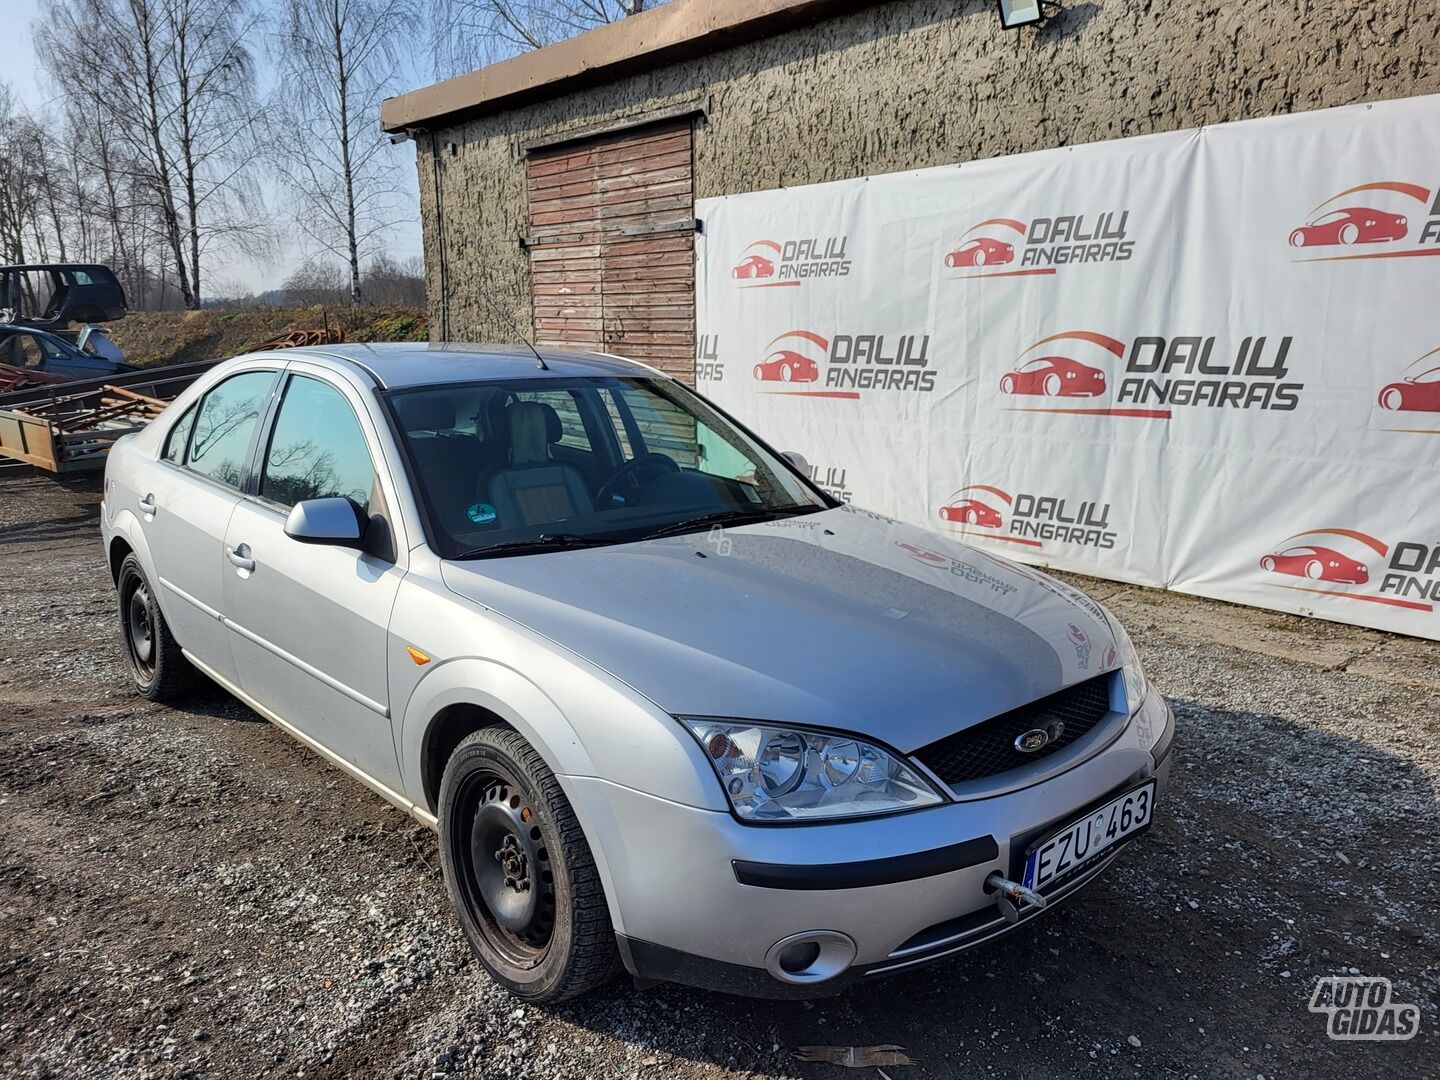 Ford Mondeo 2001 m dalys